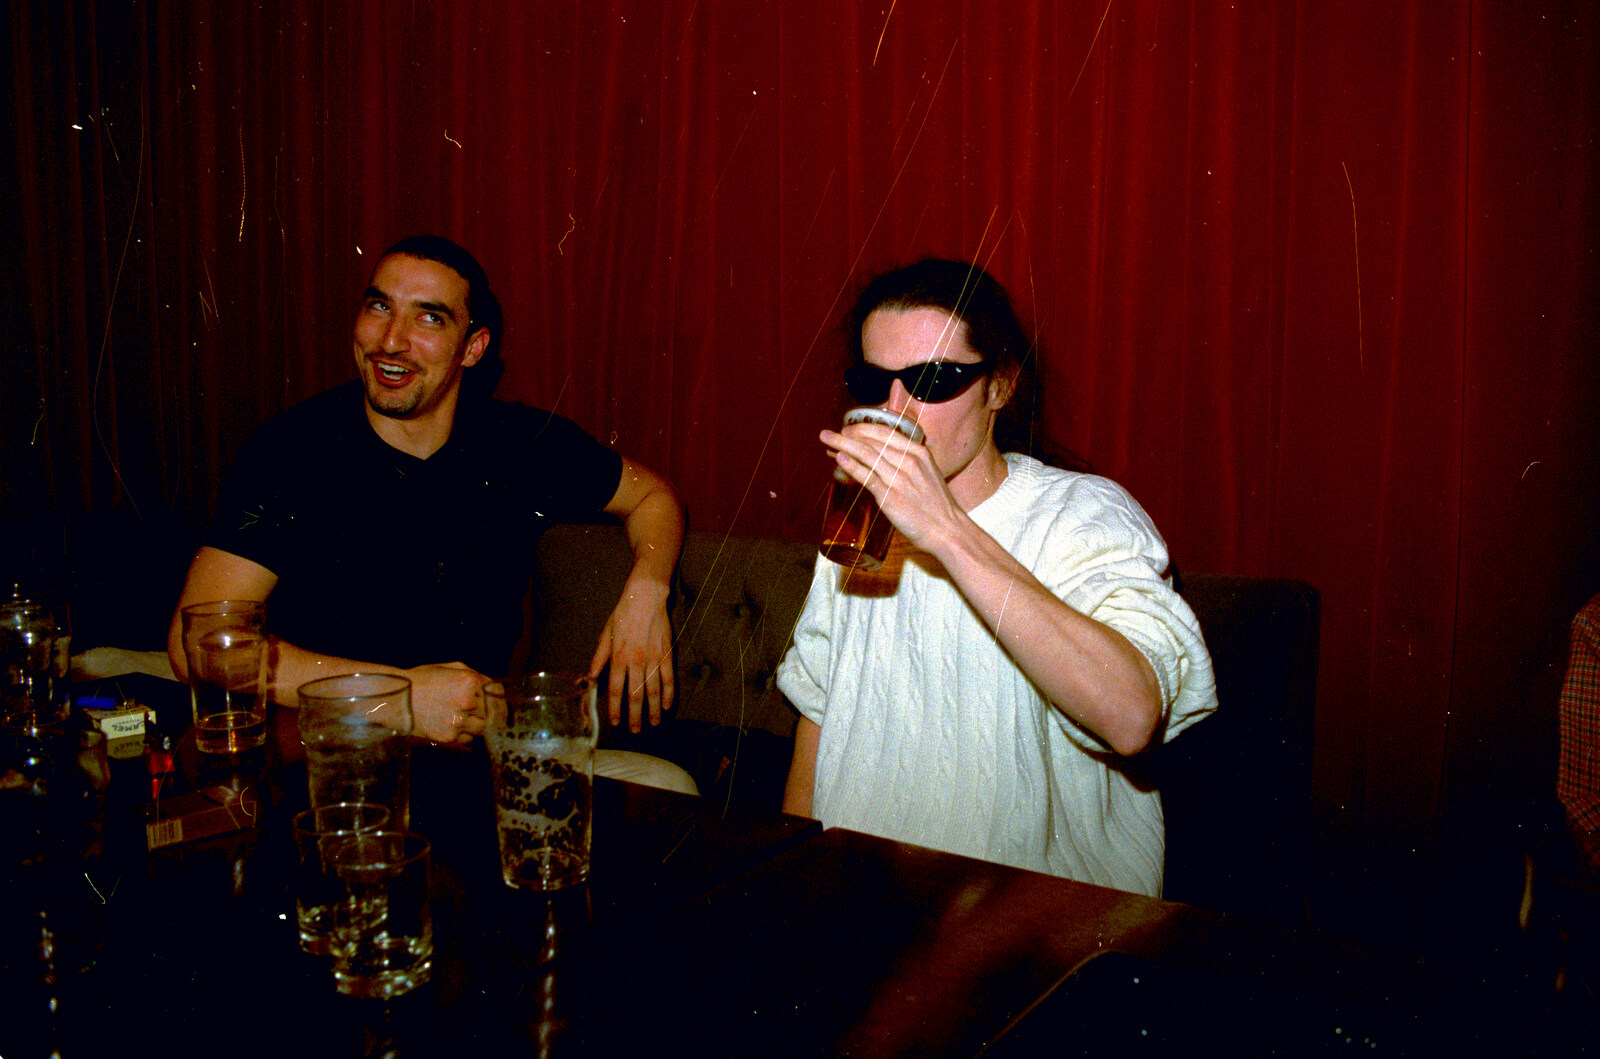 CISU Plays Cardinal's Hat in the SCC Social Club, Ipswich, Suffolk - 3rd August 1997: Orhan and the French dude